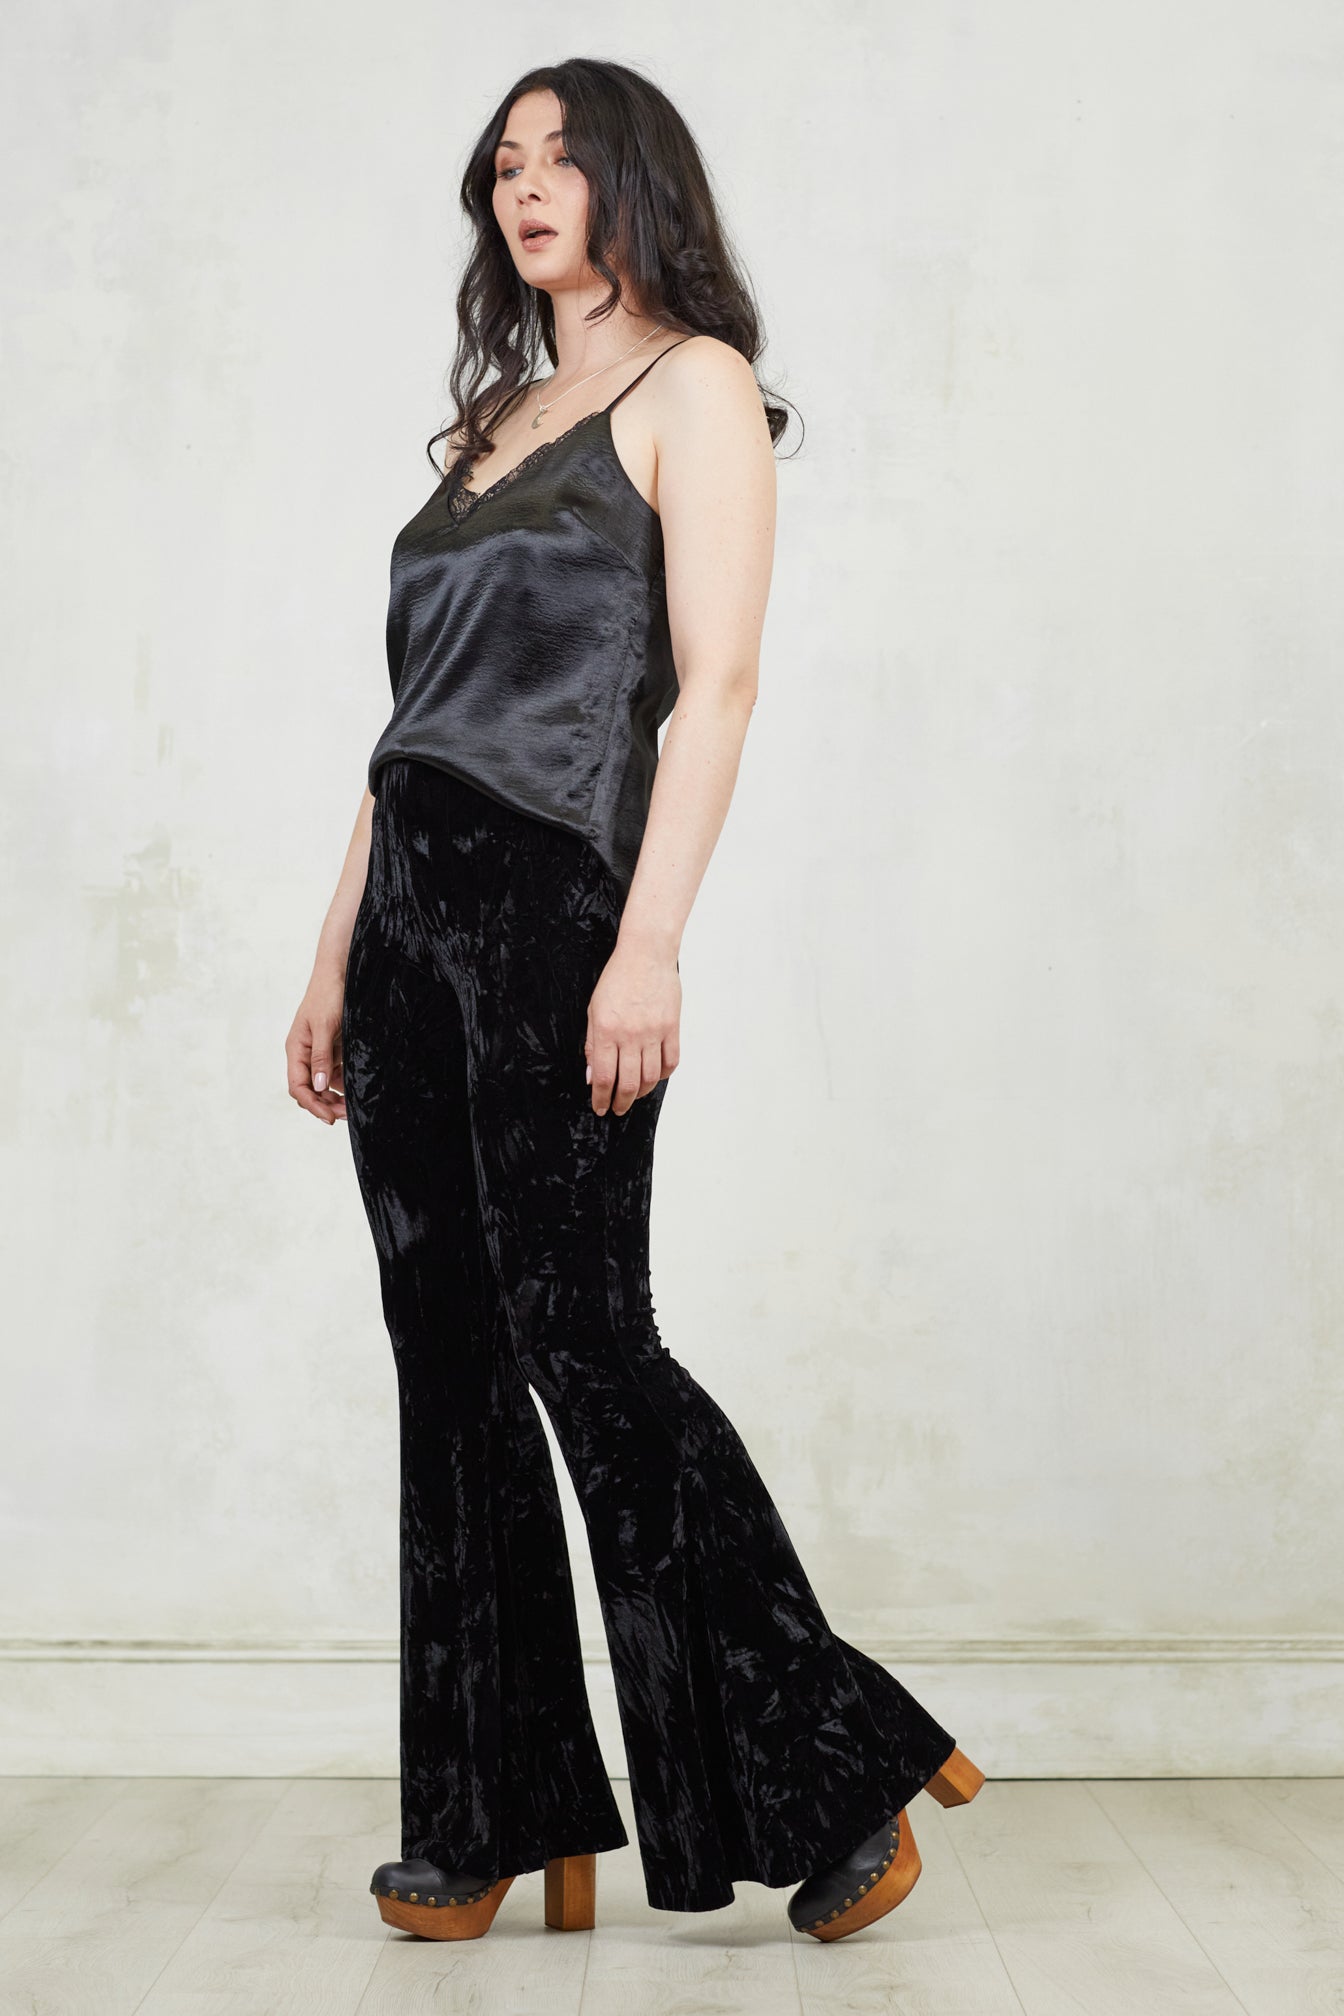 All about our Classic Black Velvet Flares